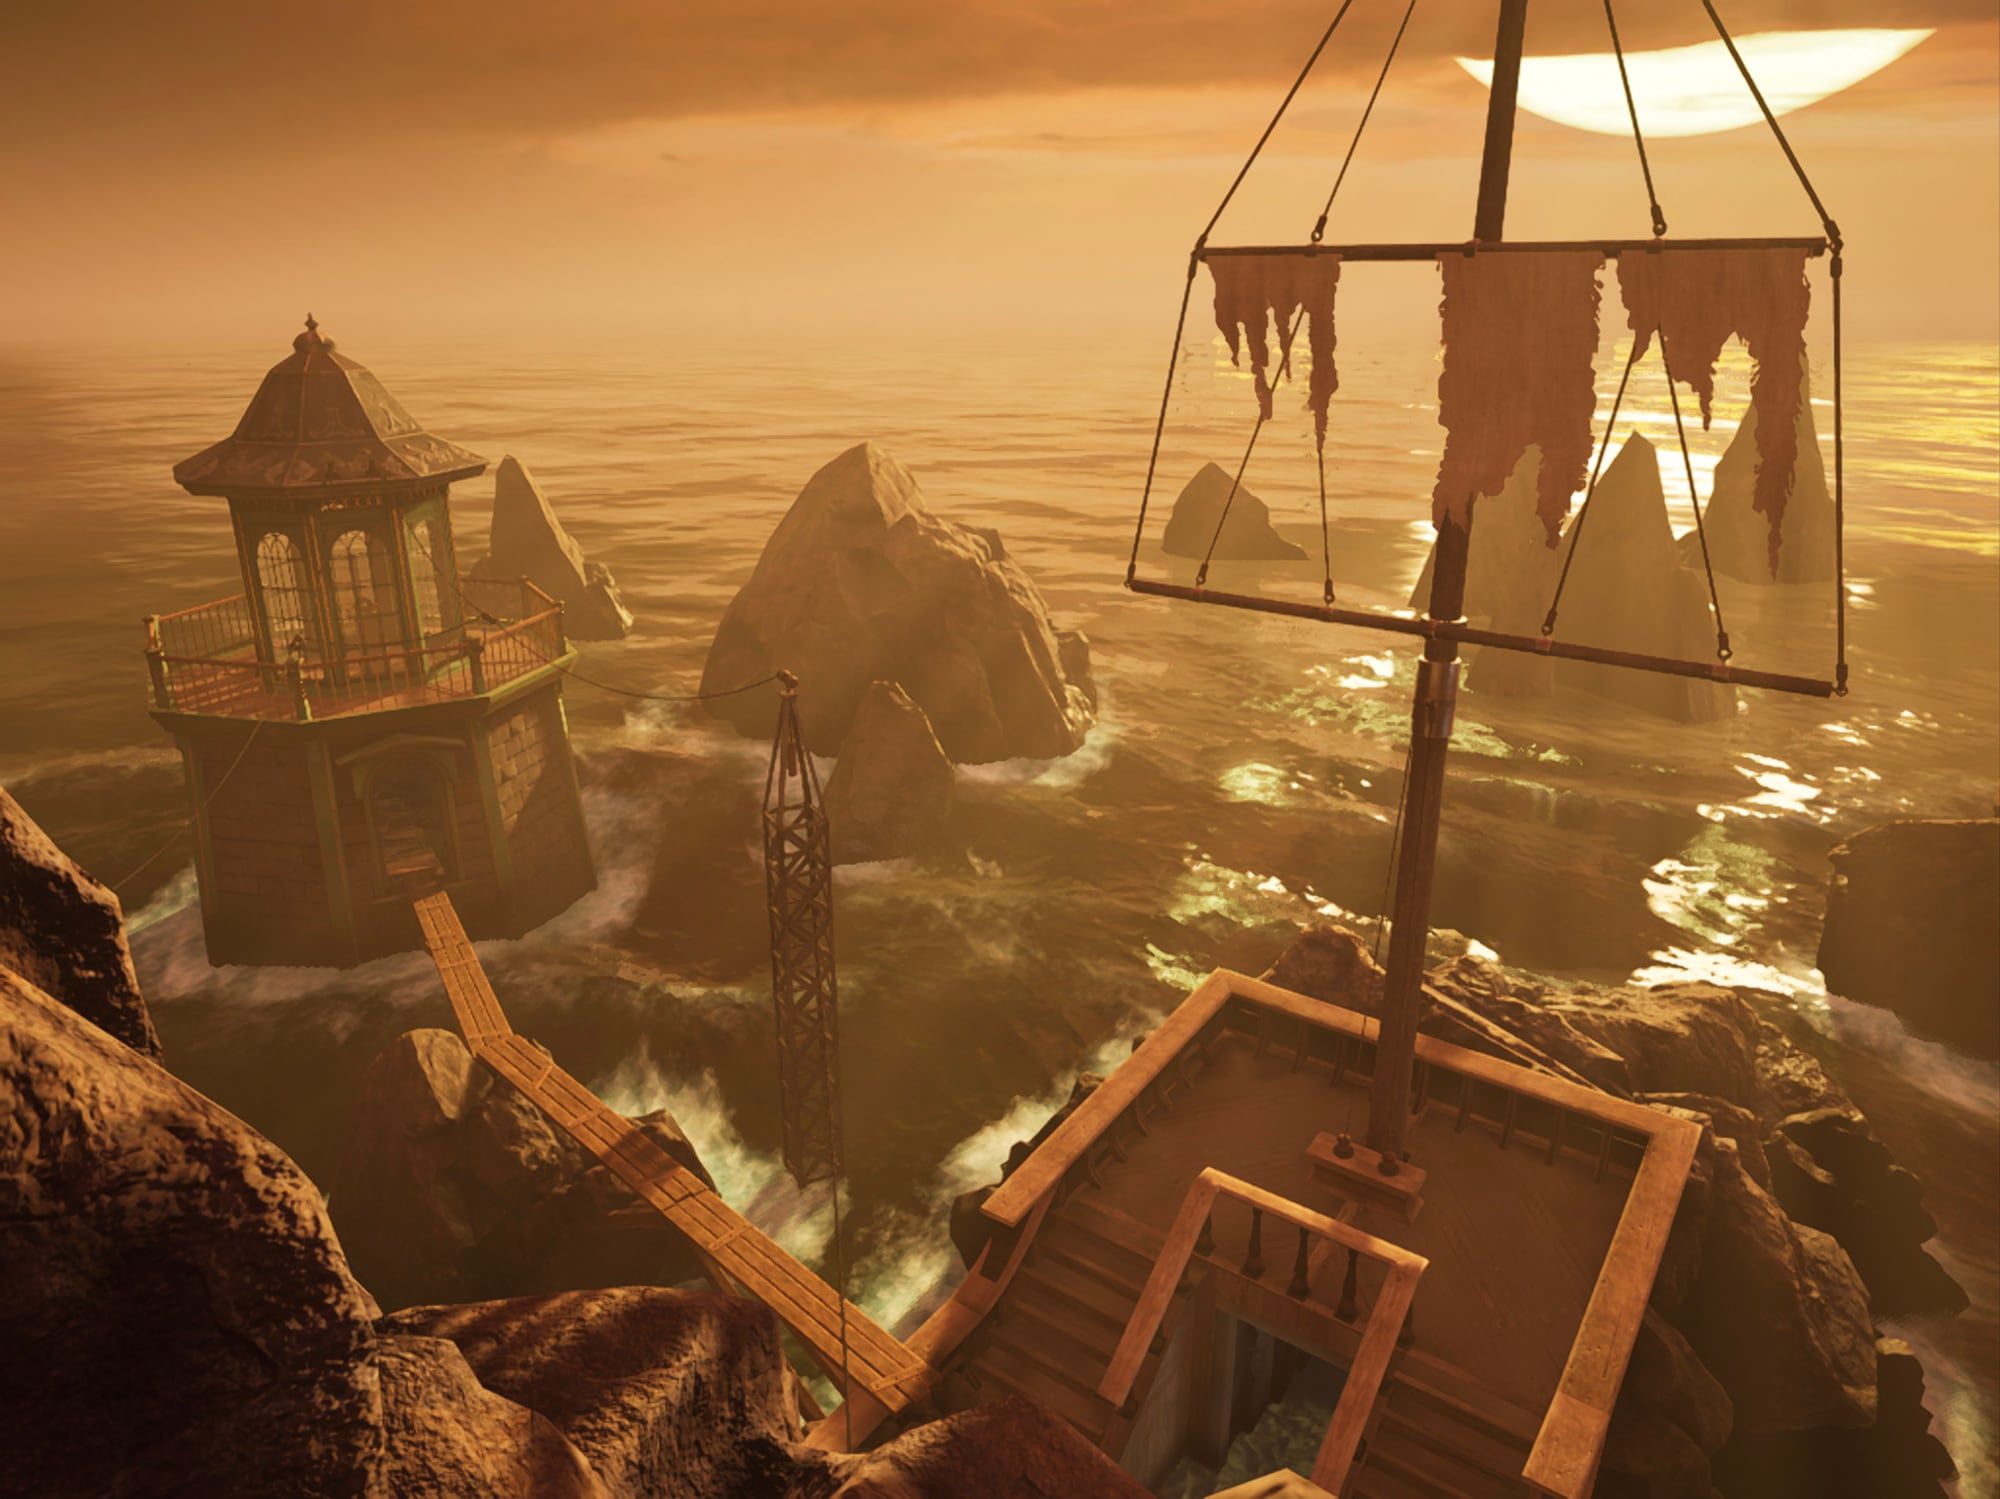 It has been 30 years since popular puzzle game Myst first came out, and to celebrate the anniversary, developer Cyan today announced the launch of a n